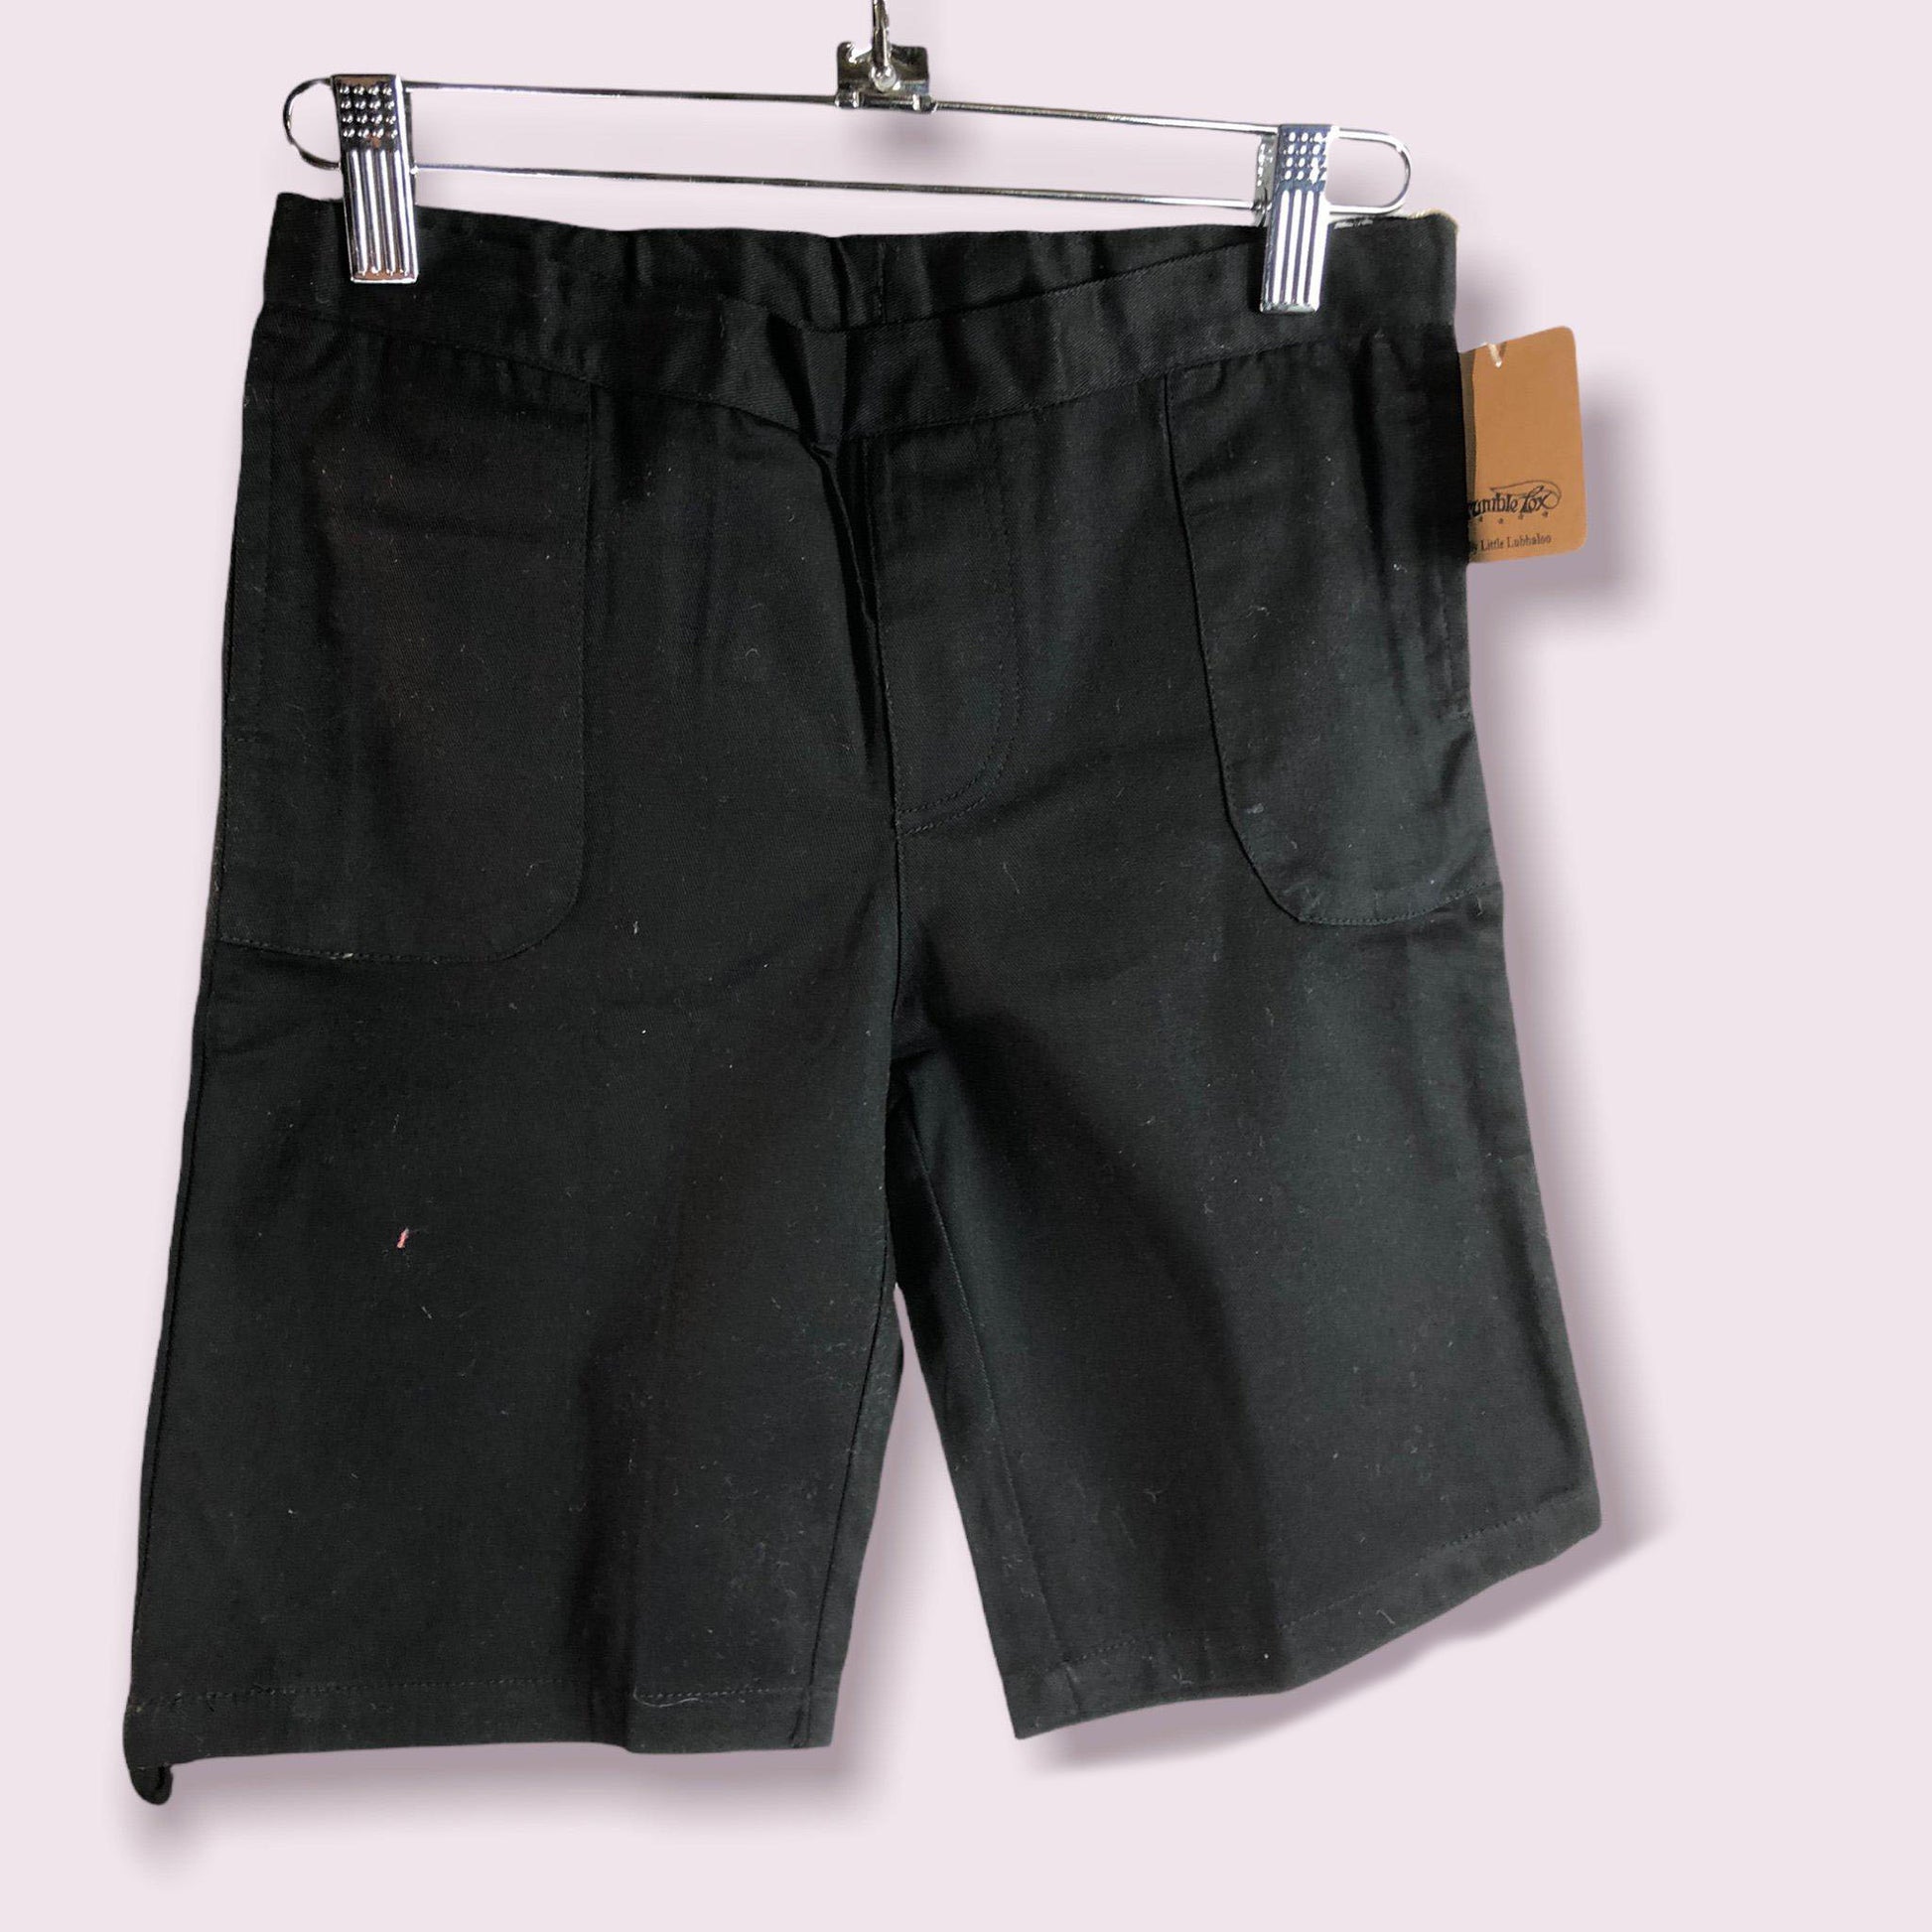 Black Unisex Cotton Shorts With Pockets-6T-